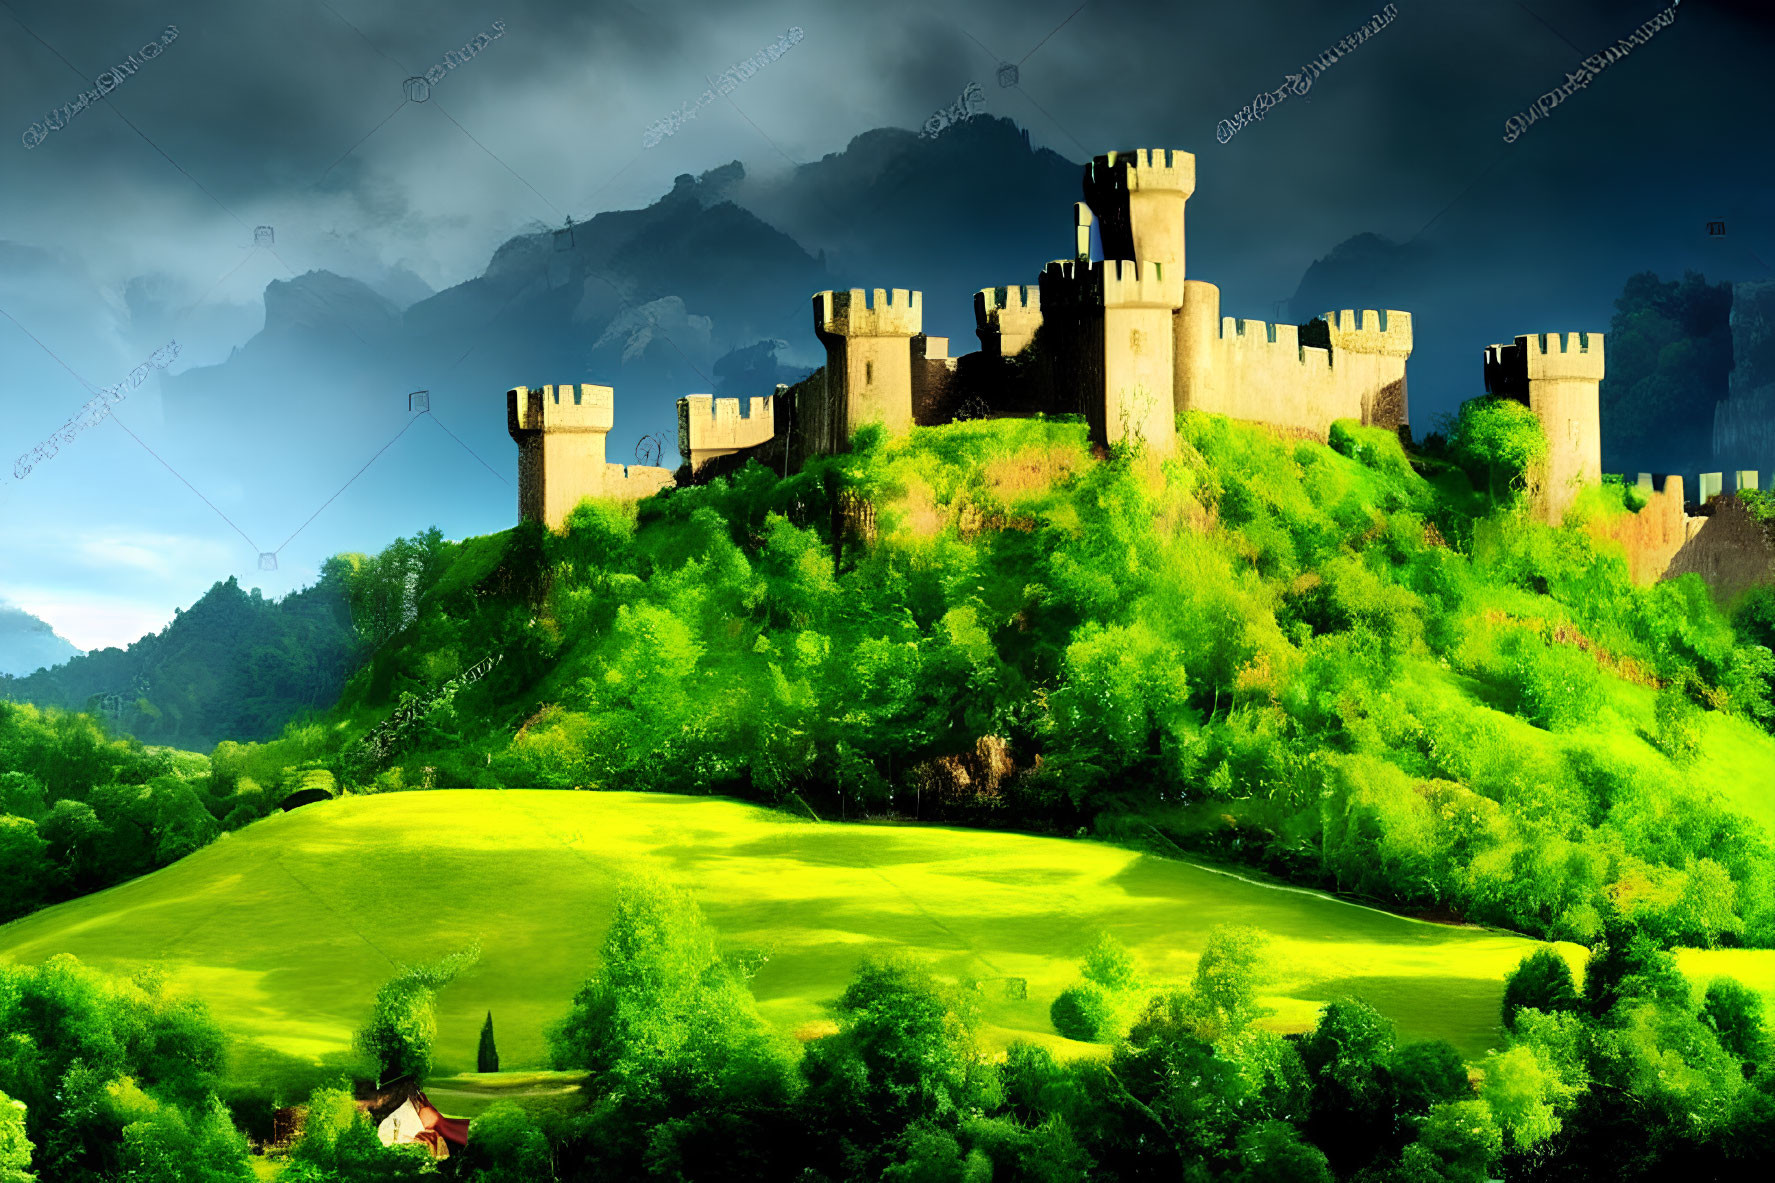 Medieval castle on green hill under dramatic sky